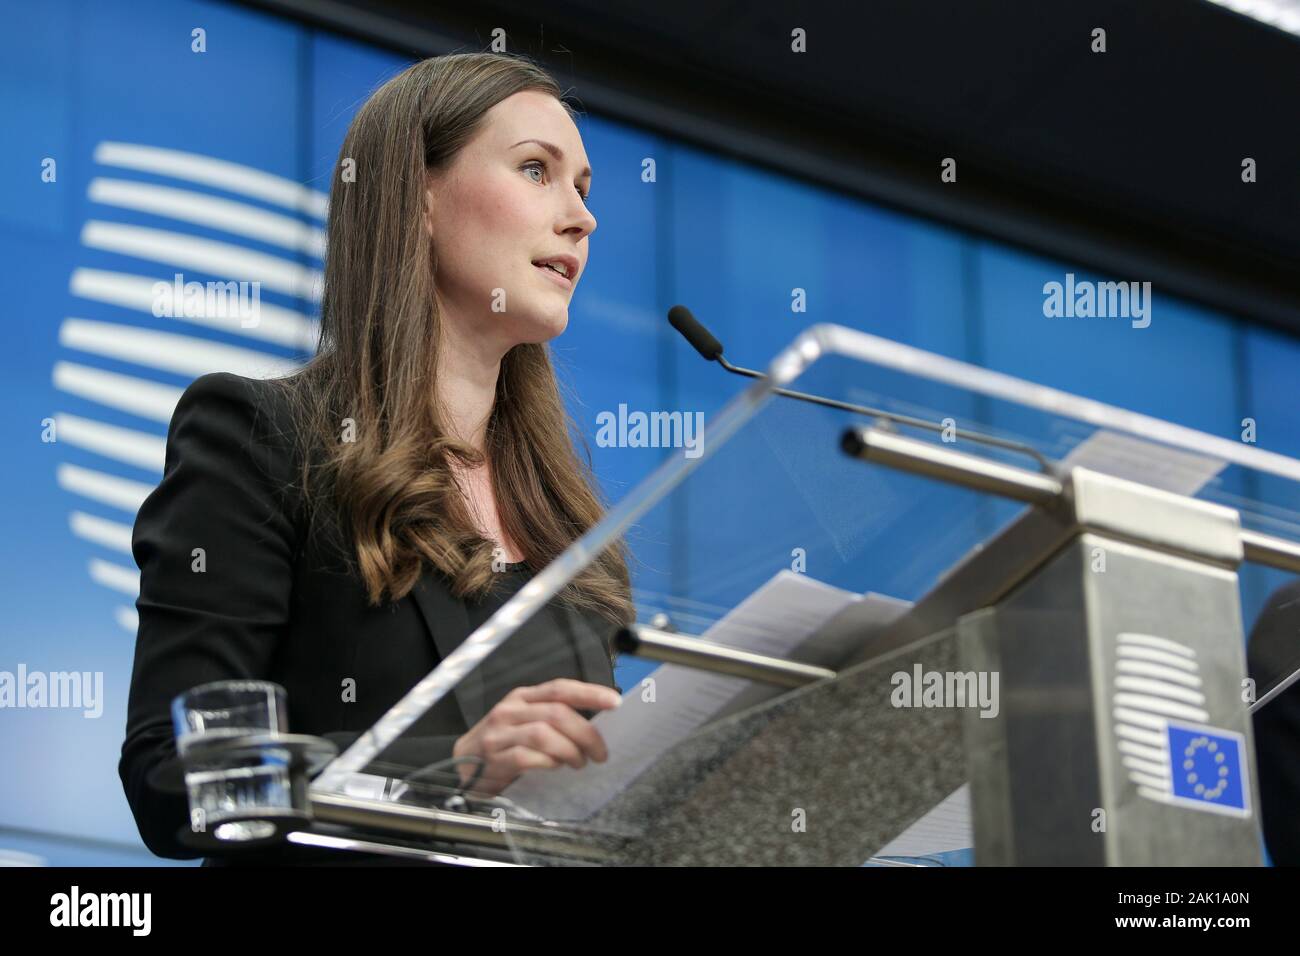 Brussels, Belgium. 14th Dec, 2019. Sanna Marin, Finnish Prime Minister speaks at a press conference after the European Council, EU Leaders Summit meeting in Brussels. Credit: Nik Oiko/SOPA Images/ZUMA Wire/Alamy Live News Stock Photo